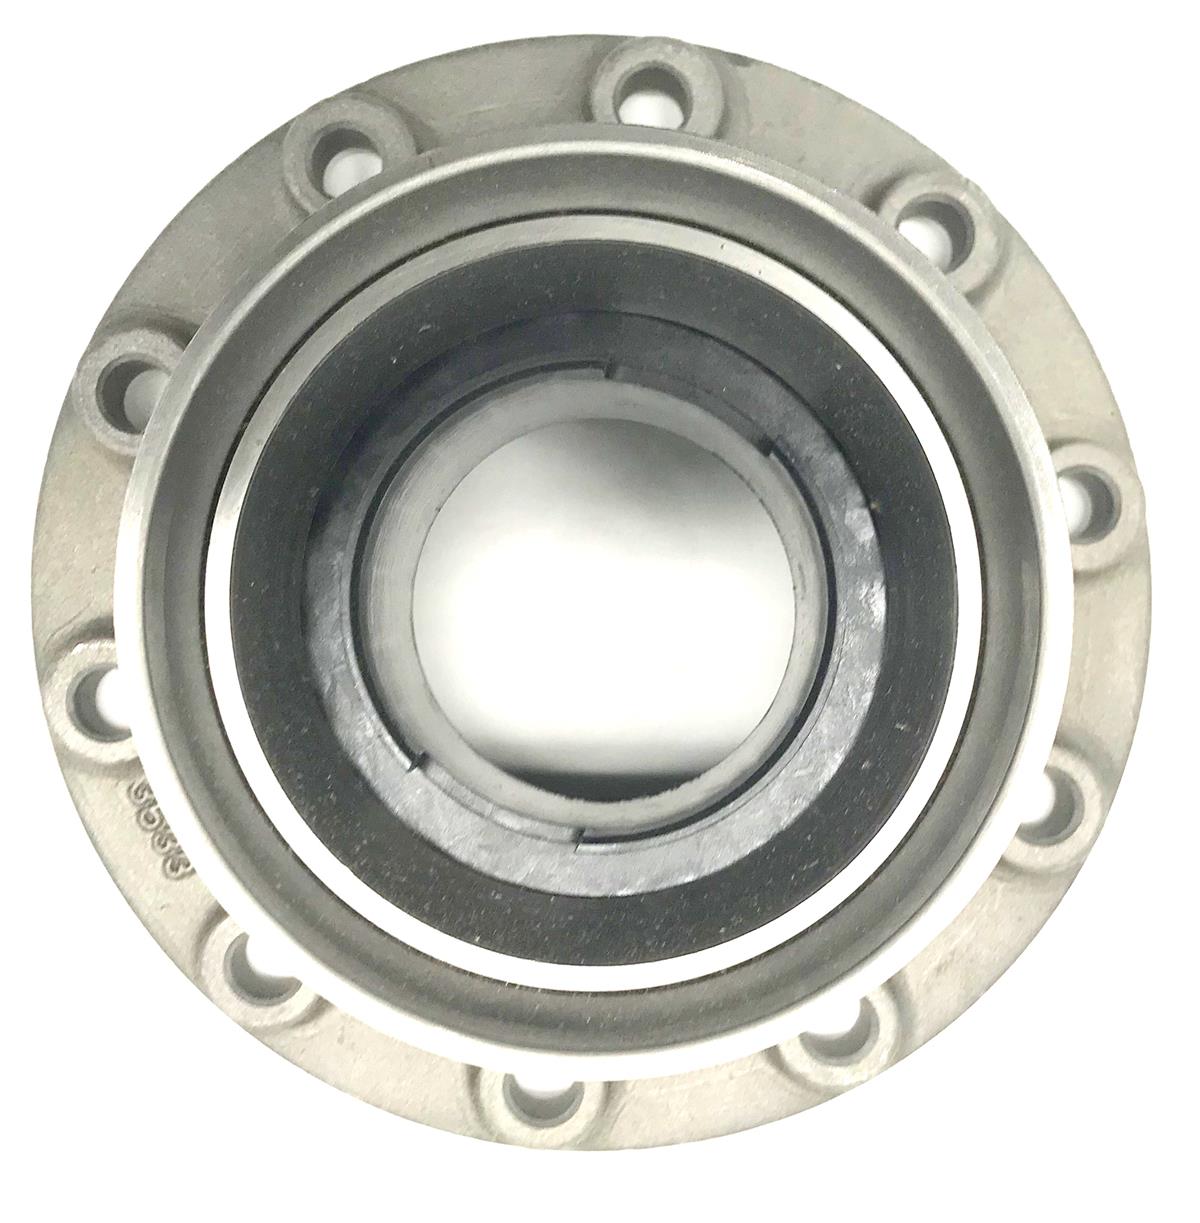 5T-991 | 5T-Front Wheel Hub for M939A2 (1).JPG